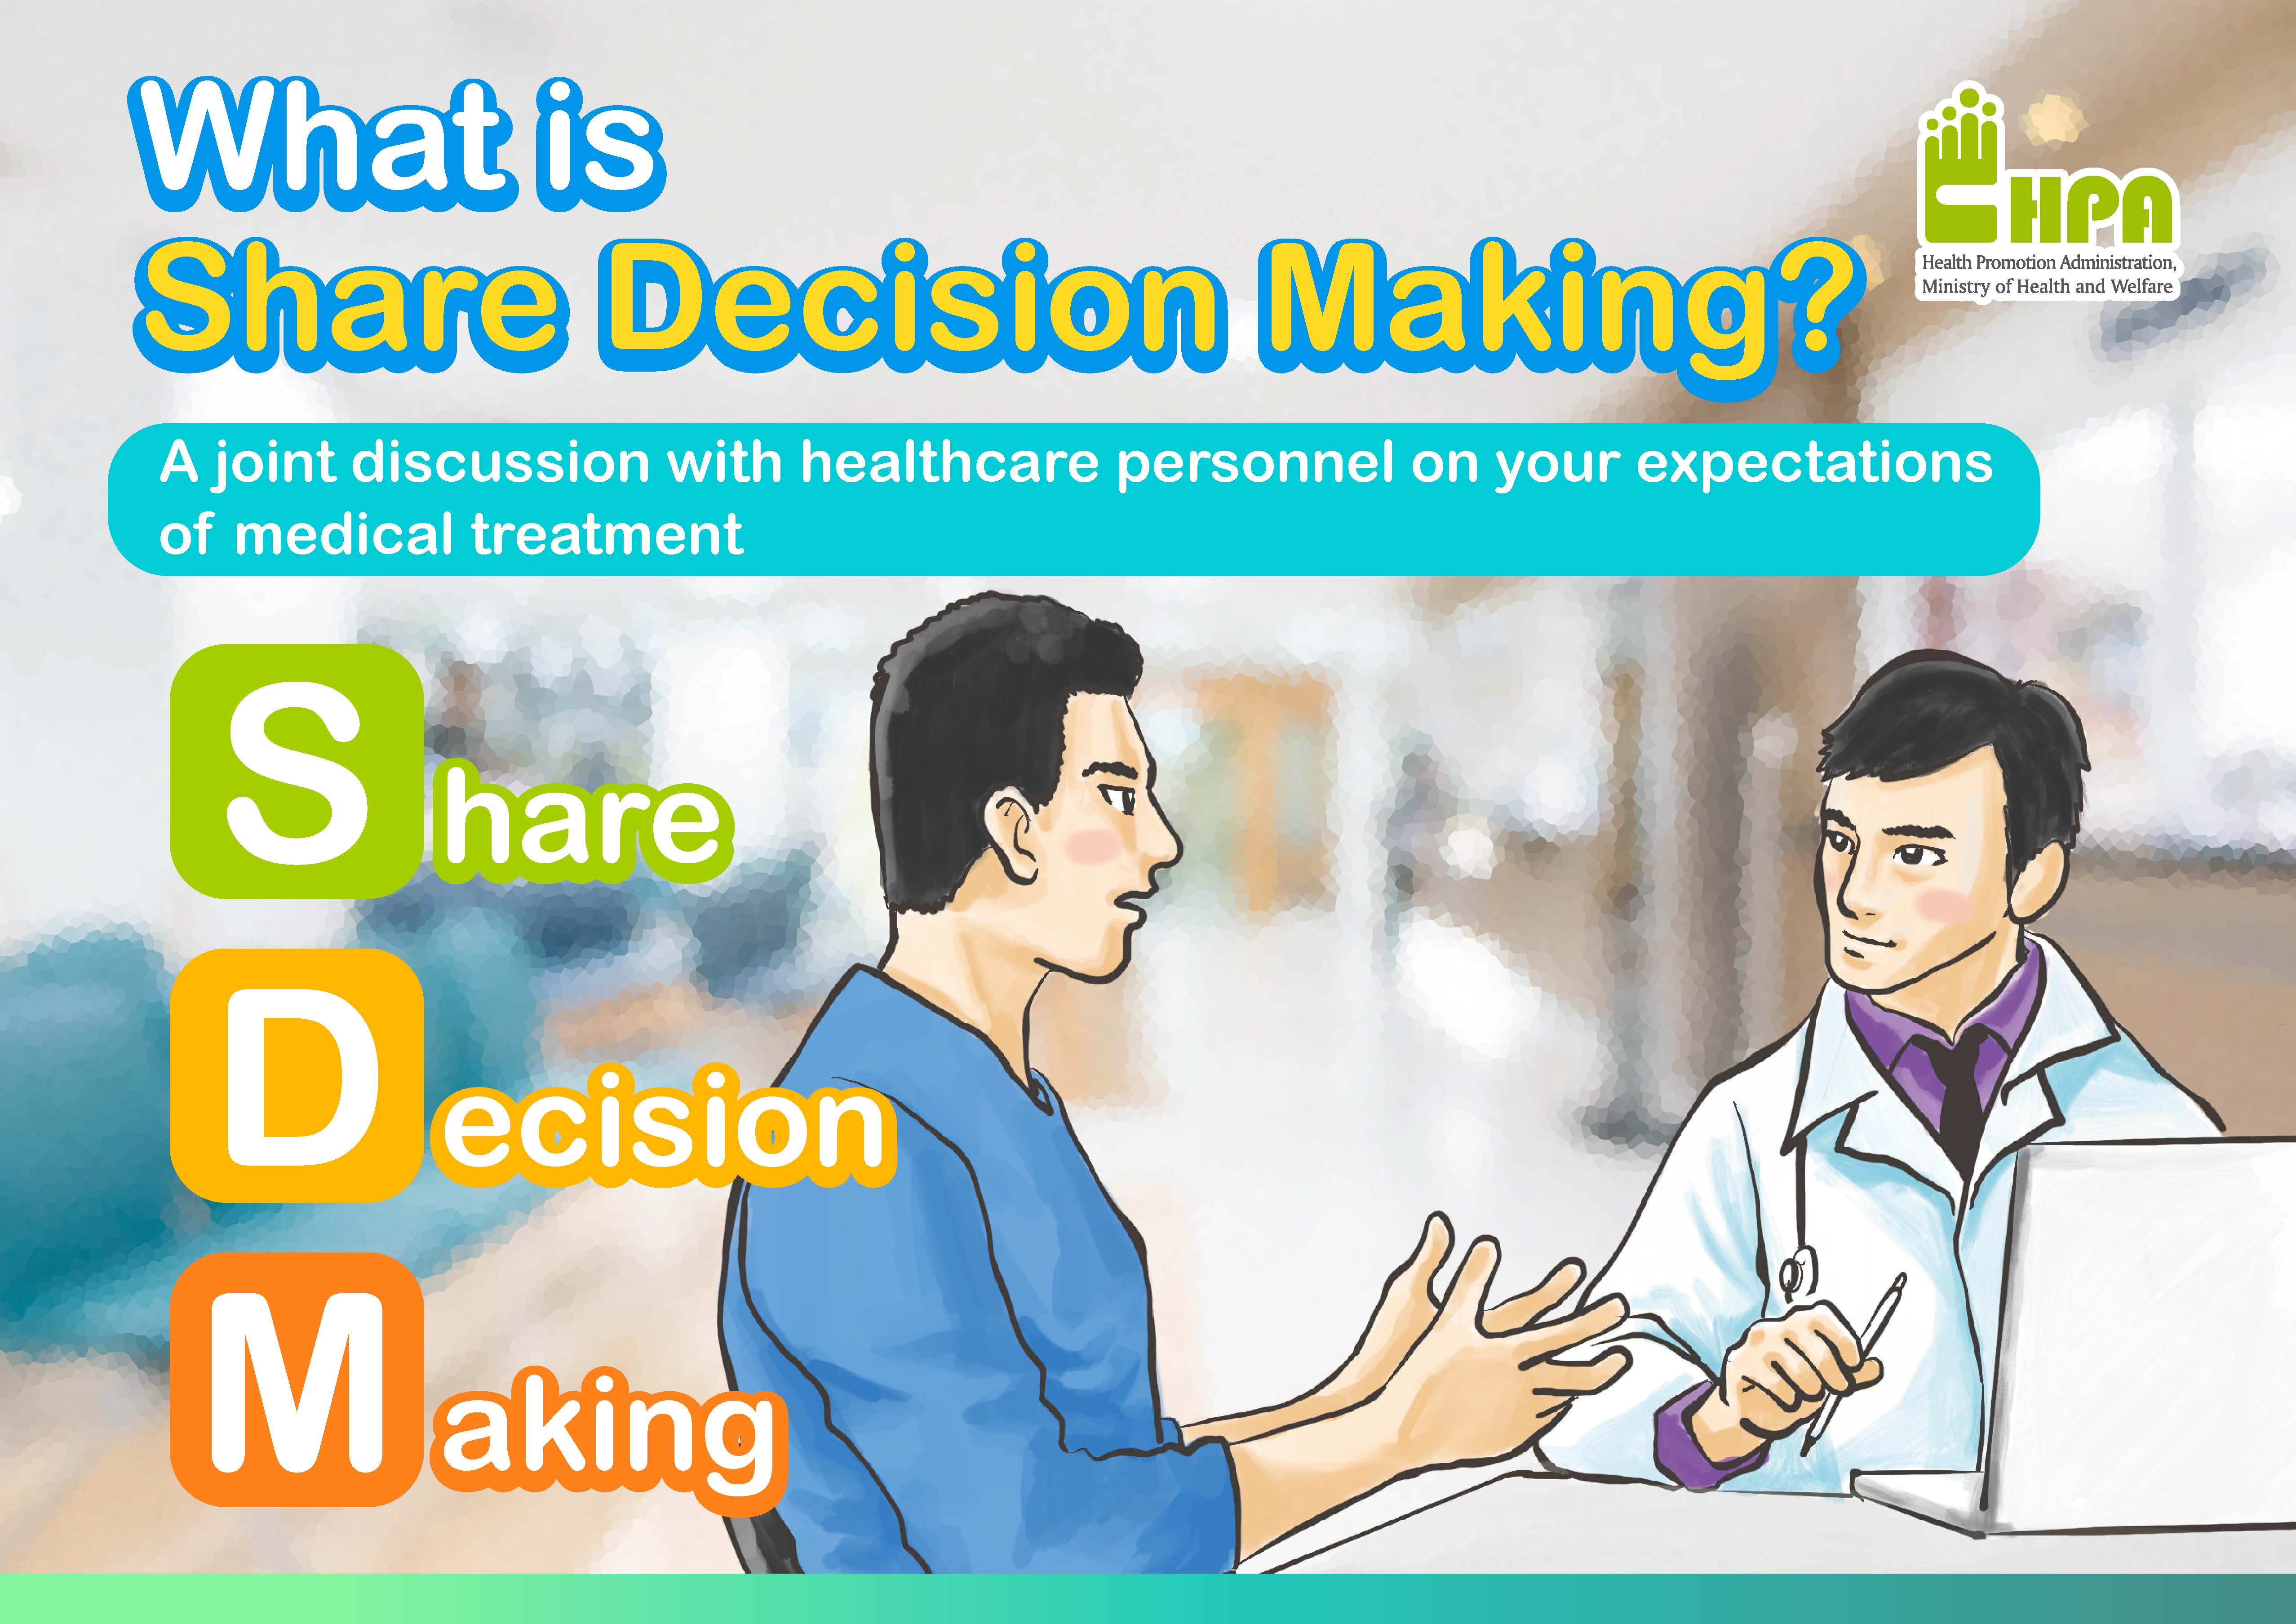 What is Share Decision Making? SDM醫病共享決策懶人包